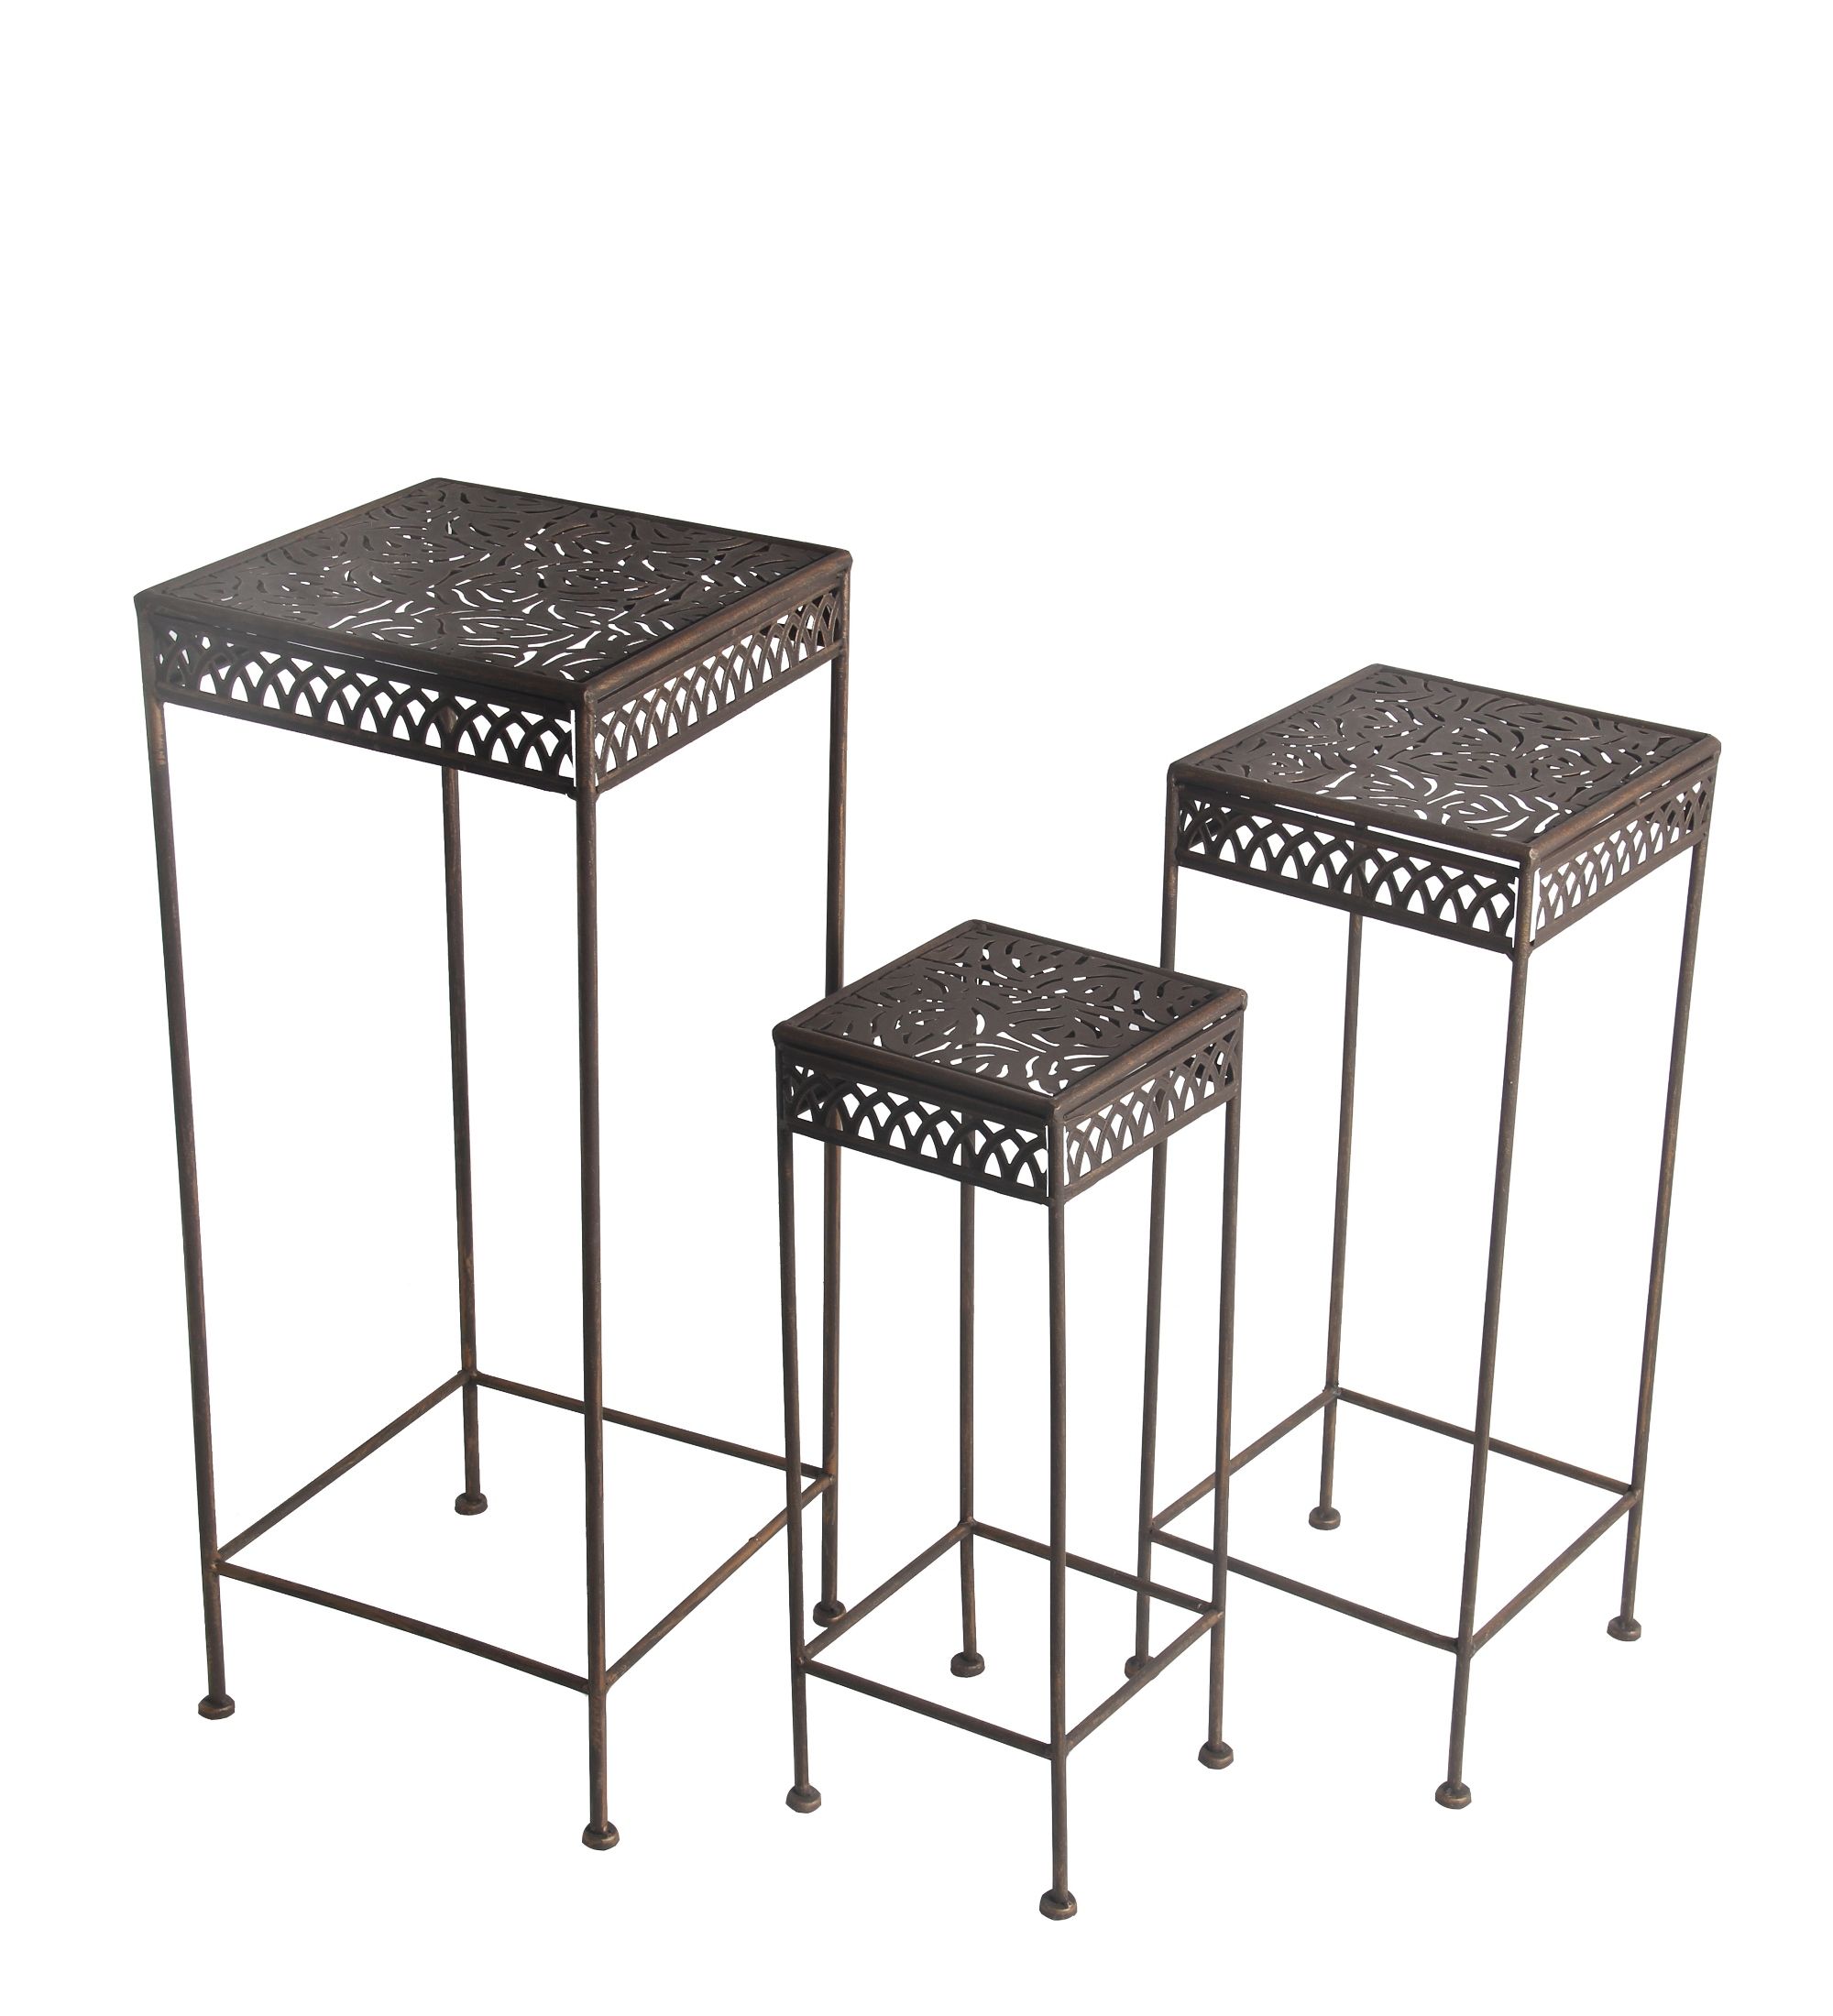 Privilege International Square Dark Bronze Finished Iron Plant Stand With  Square Brace Base – Set Of 3 – Walmart With Regard To Iron Square Plant Stands (View 14 of 15)